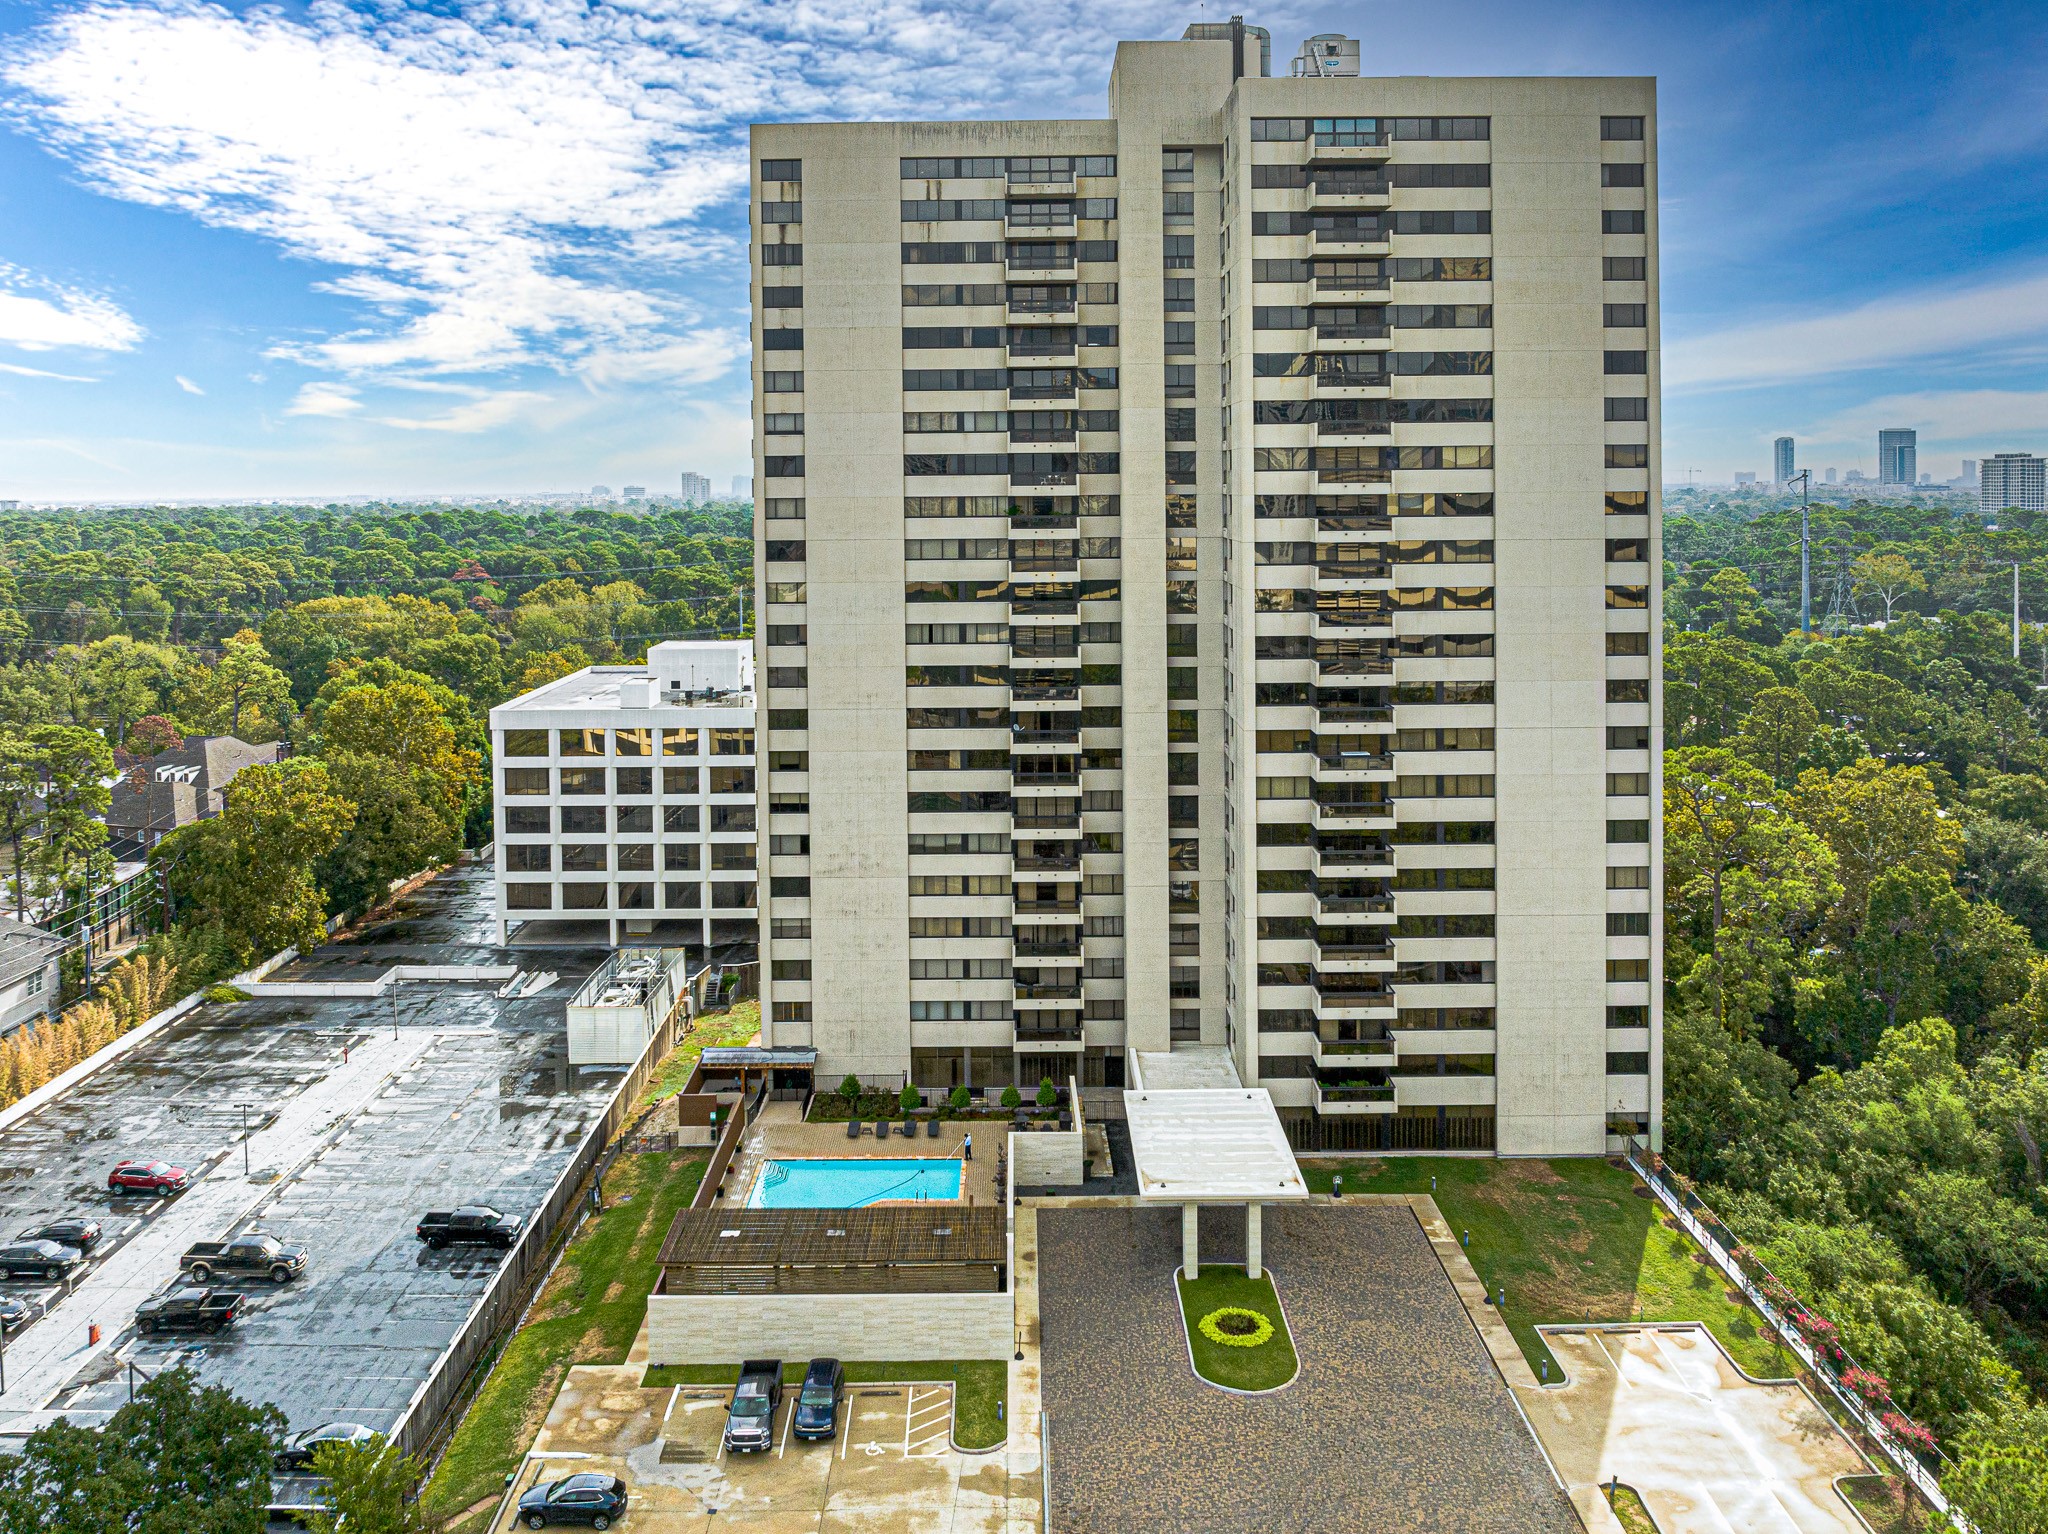 Park Square condos are located inside 610 and are convenient to the Galleria, River Oaks and Uptown Houston